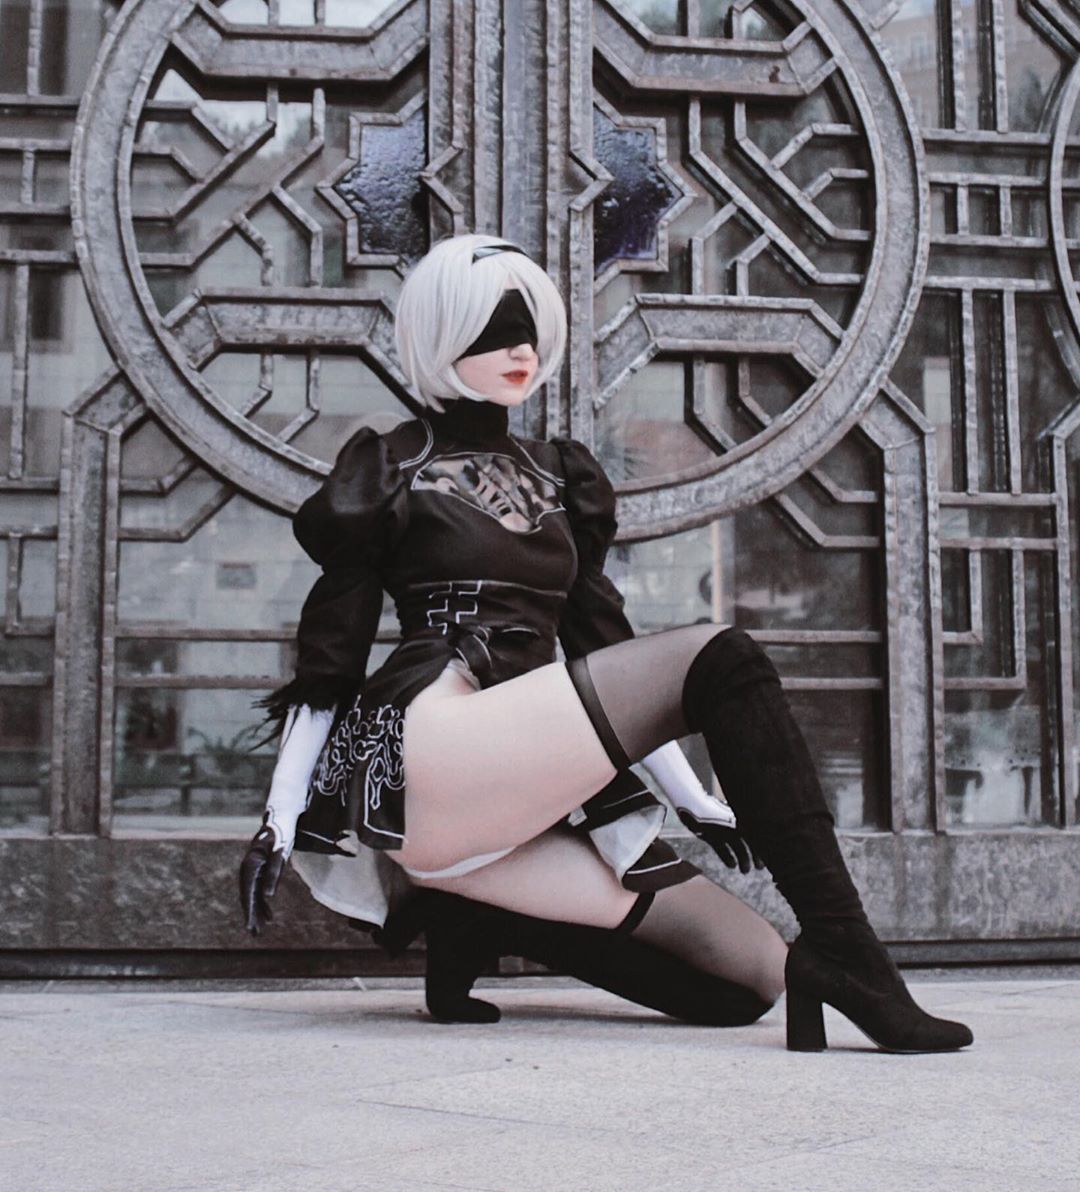 2b By Aldrean